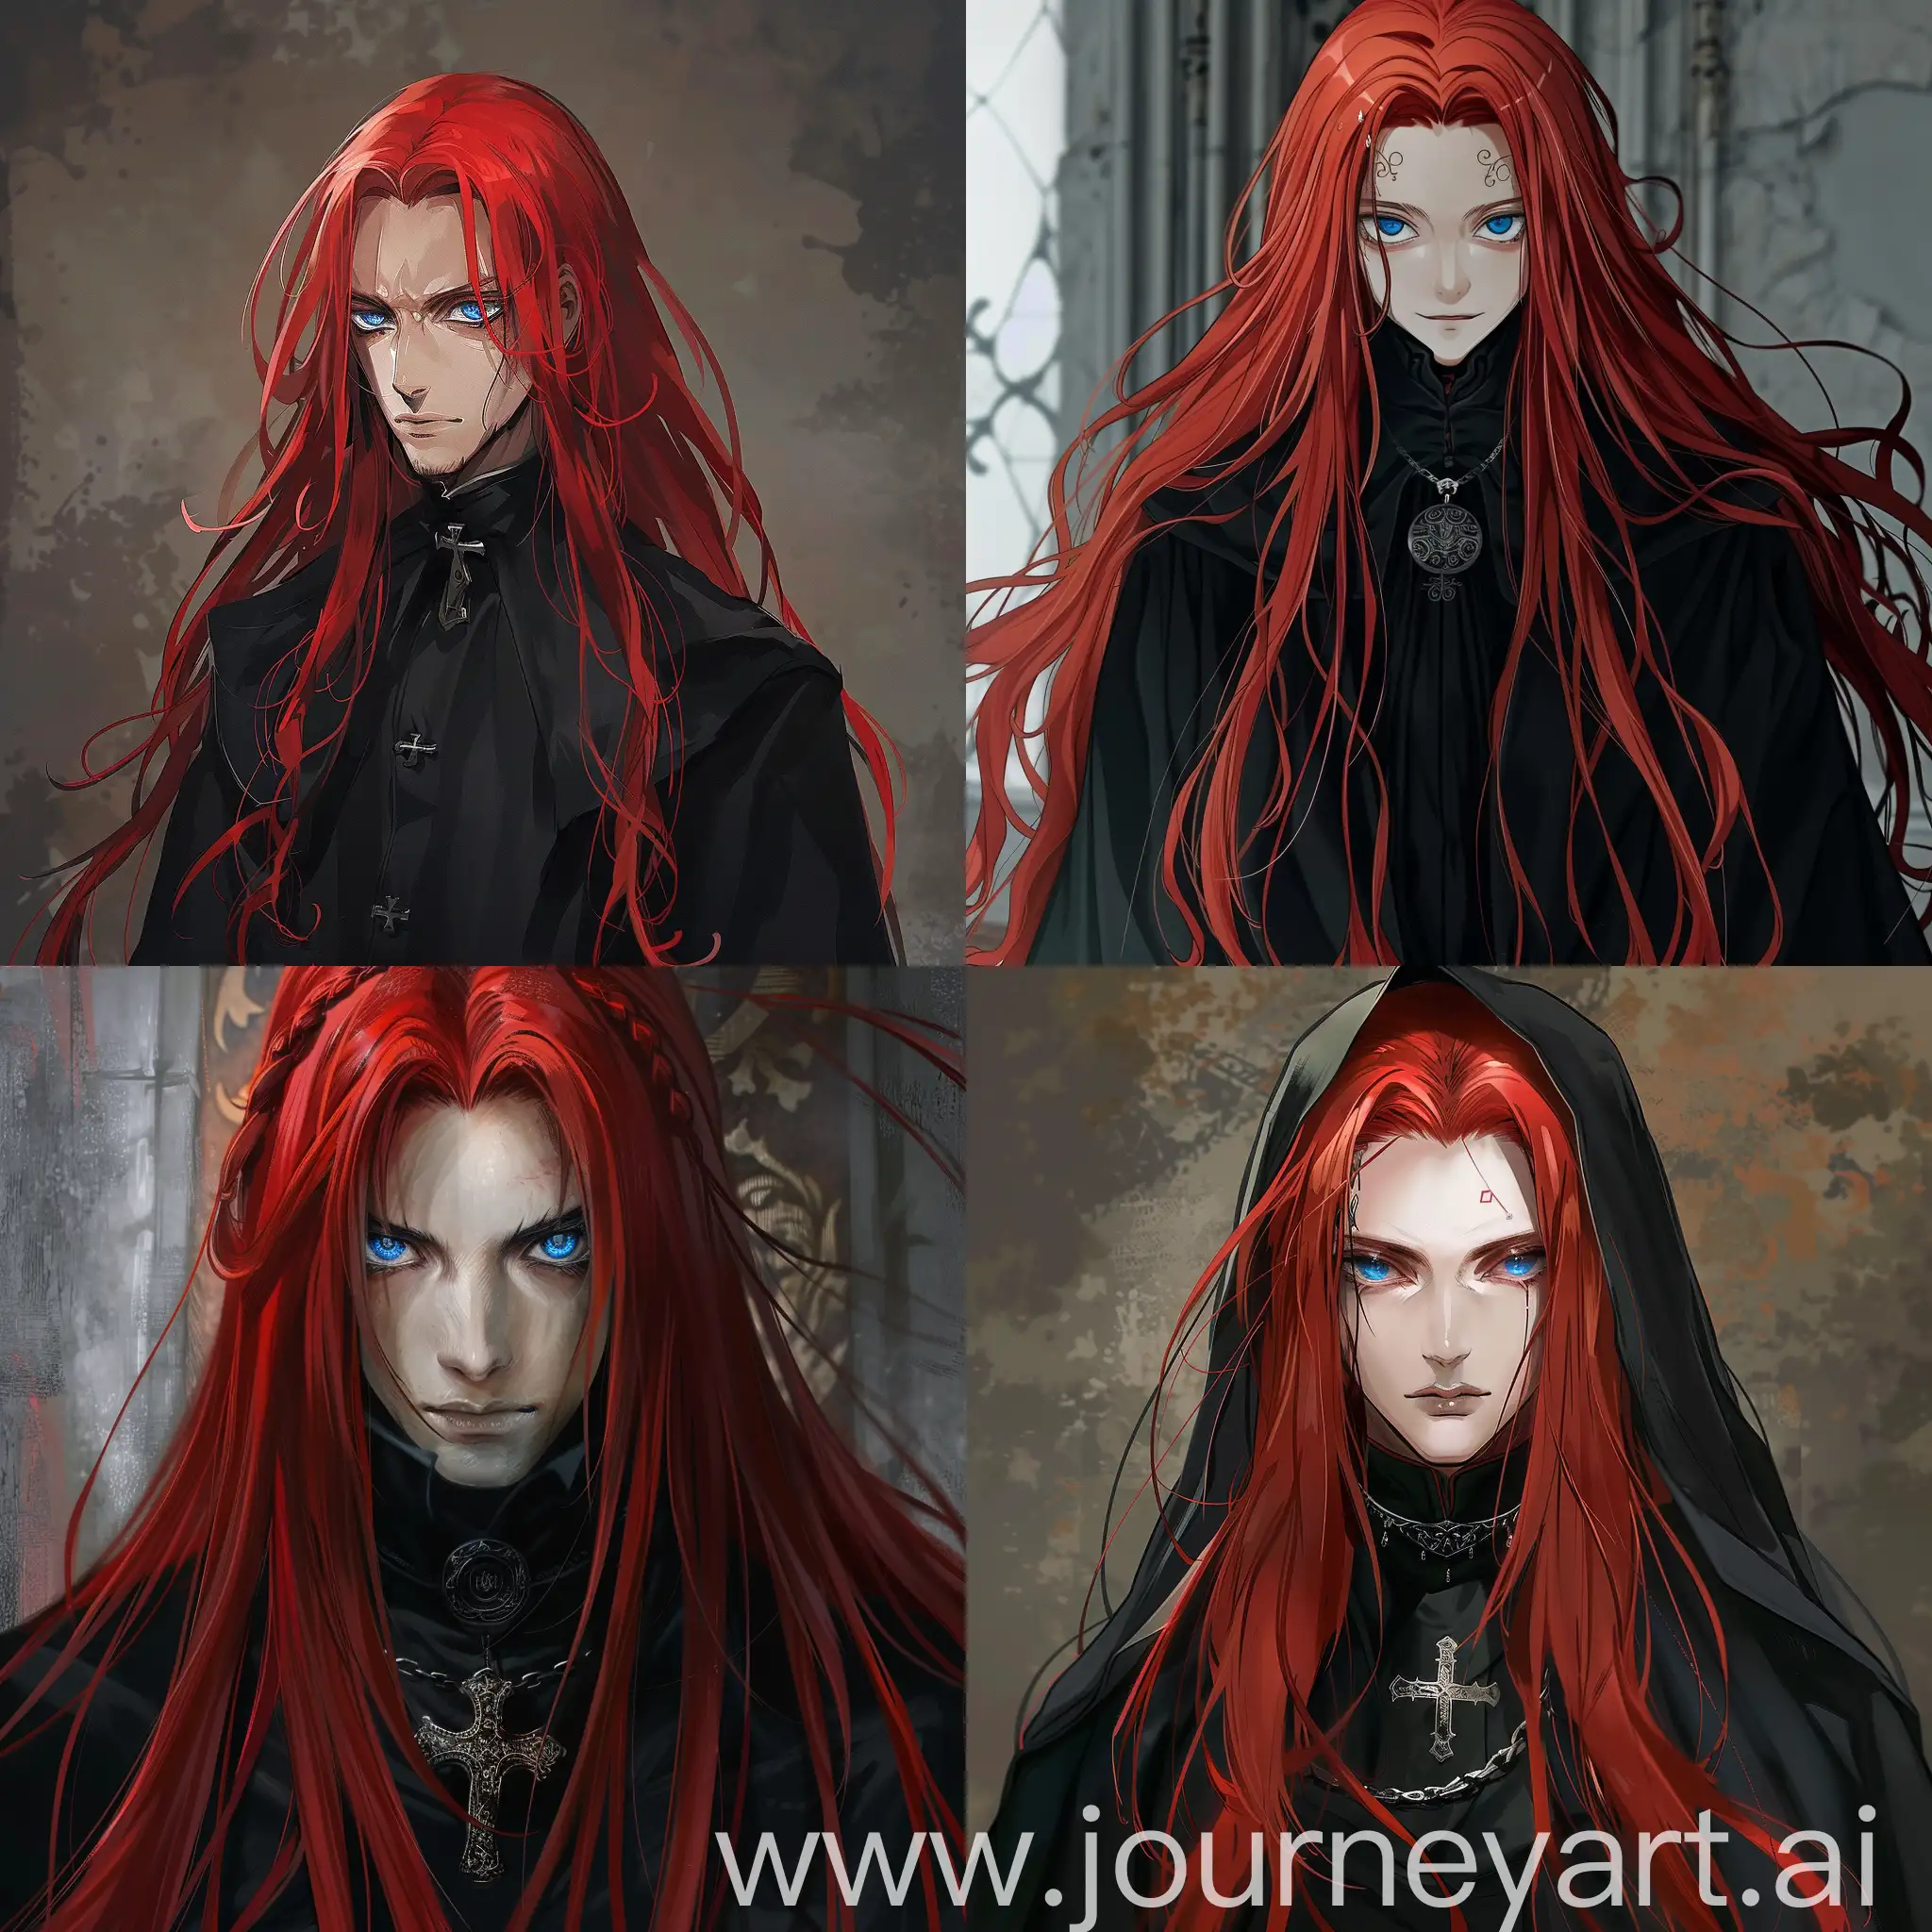 ArkhangeL-with-Long-Red-Hair-and-Blue-Eyes-in-Black-Priest-Clothes